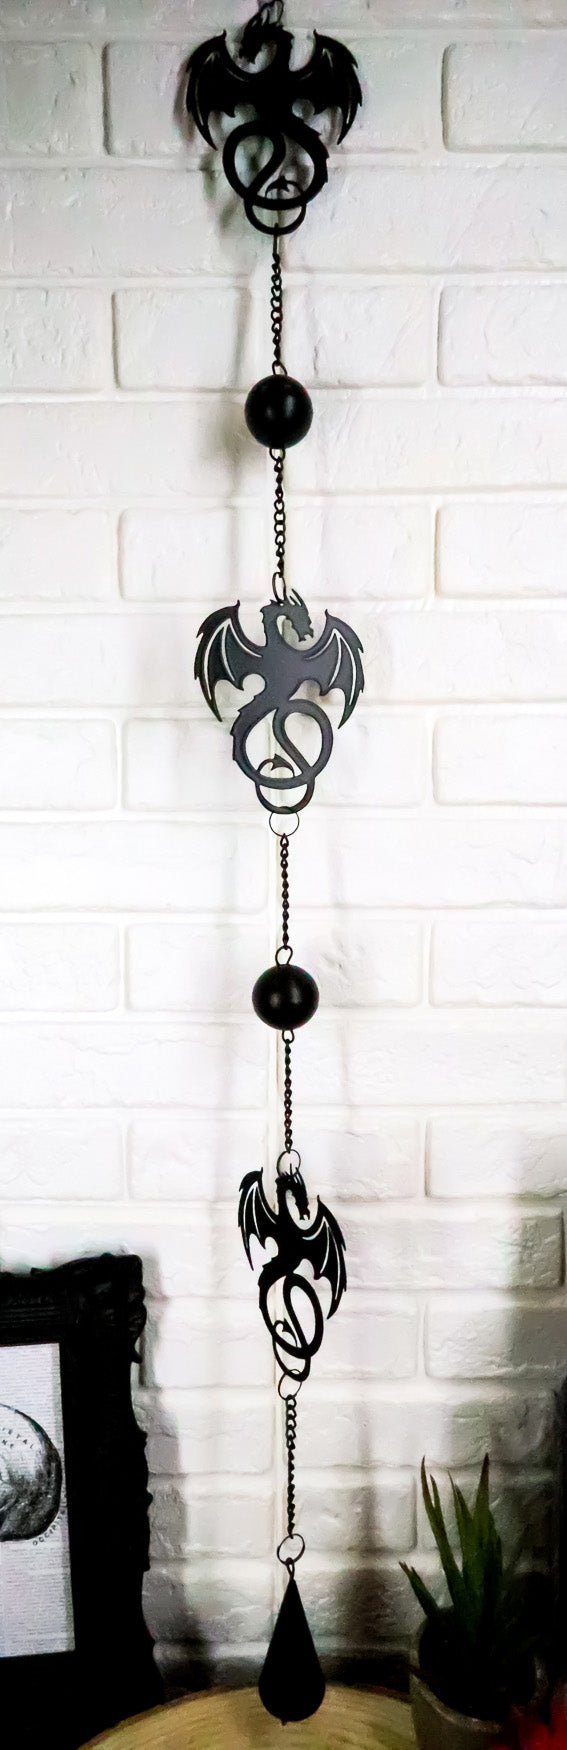 Wyverex Alchemy Folklore Dragon Metal Wall Hanging Mobile Wind Chime With Beads